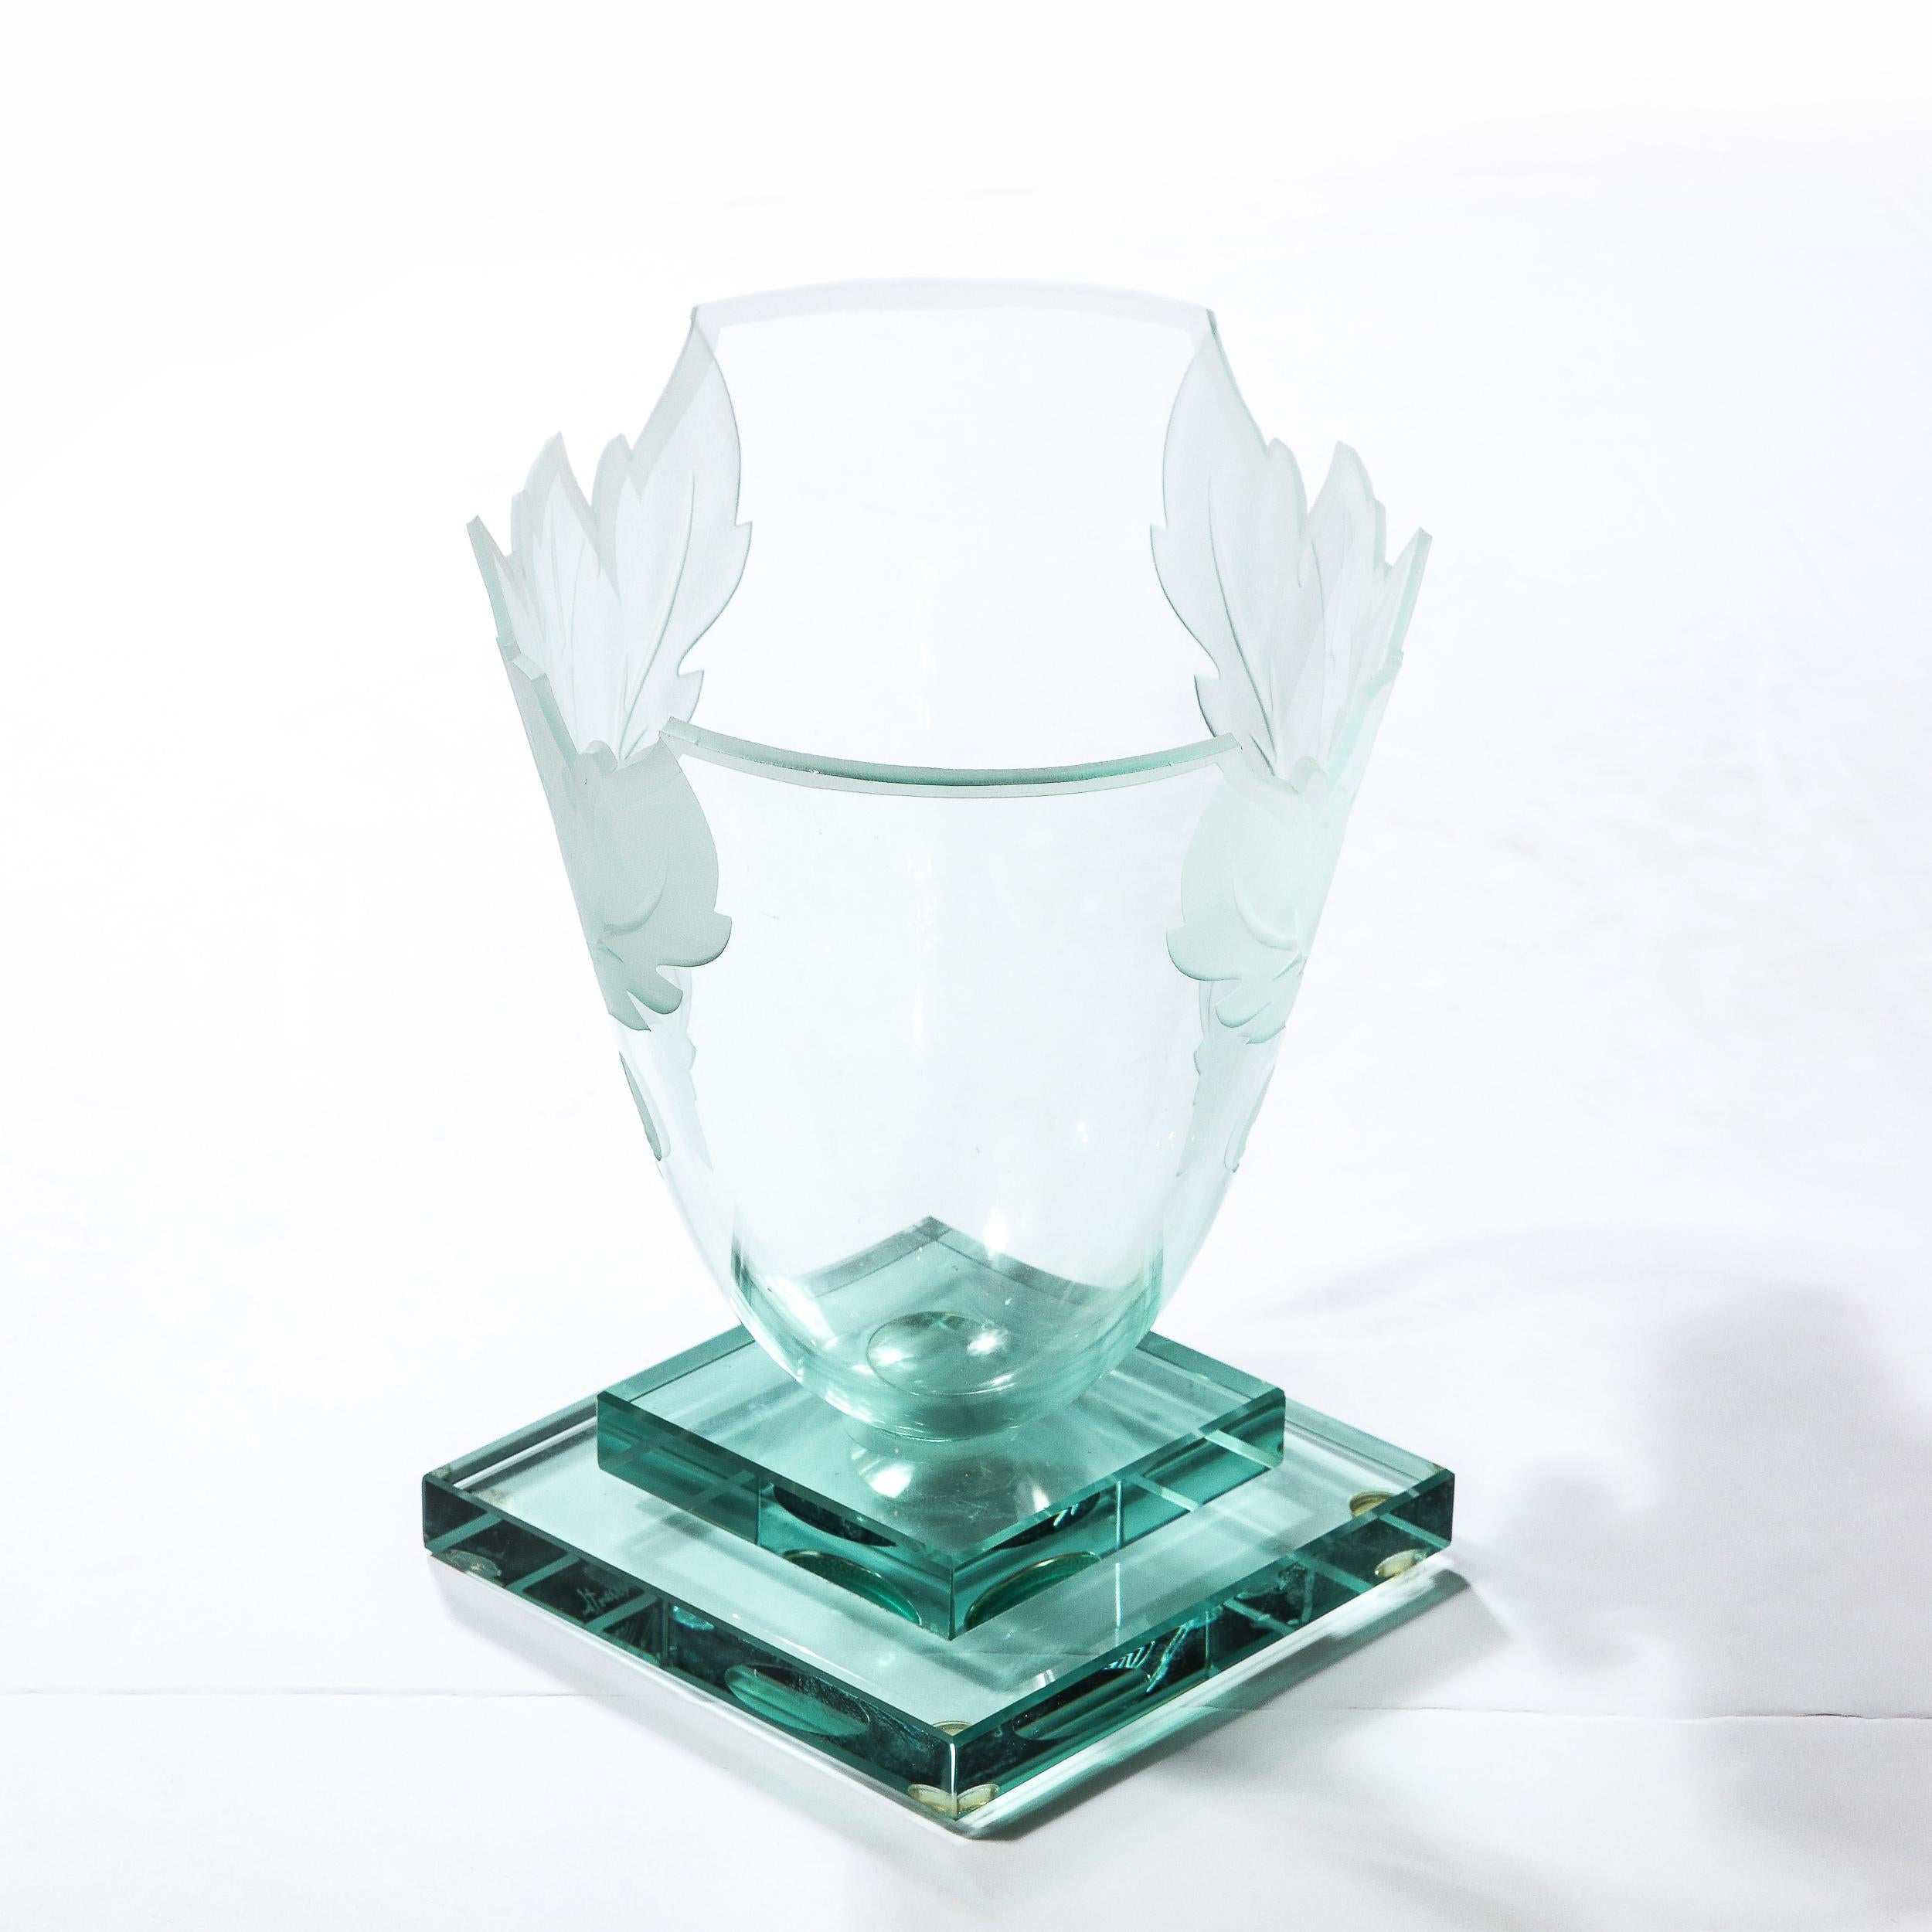 Frosted and Etched Cut Glass Leaf Vase/Bowl on Geometric Base by Robert Guenther For Sale 5